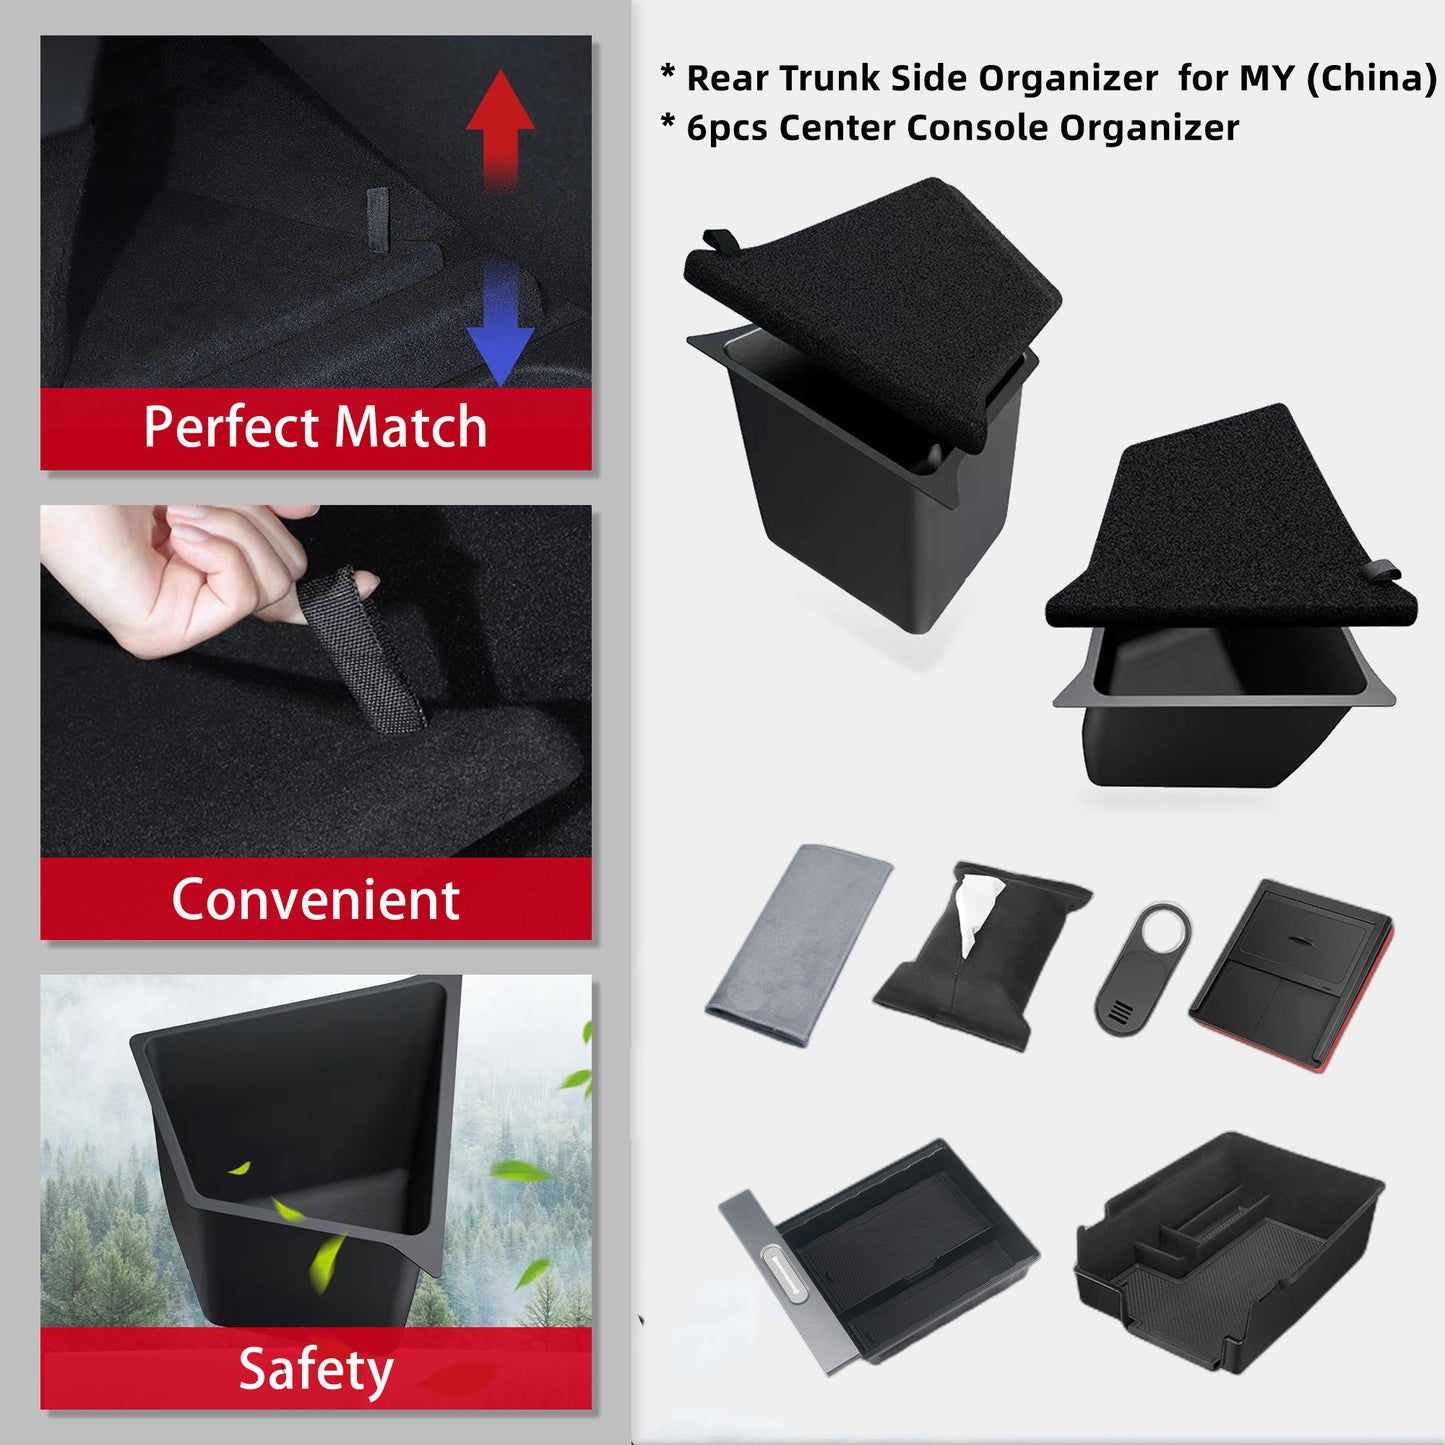 Tesla Model Y Rear Trunk Side Organizer Sorting Bins and Central Control Storage Box 6-Piece Set can be inserted directly into the groove without tools. They can also be easily removed for cleaning or accessOriginal car standard diy design.